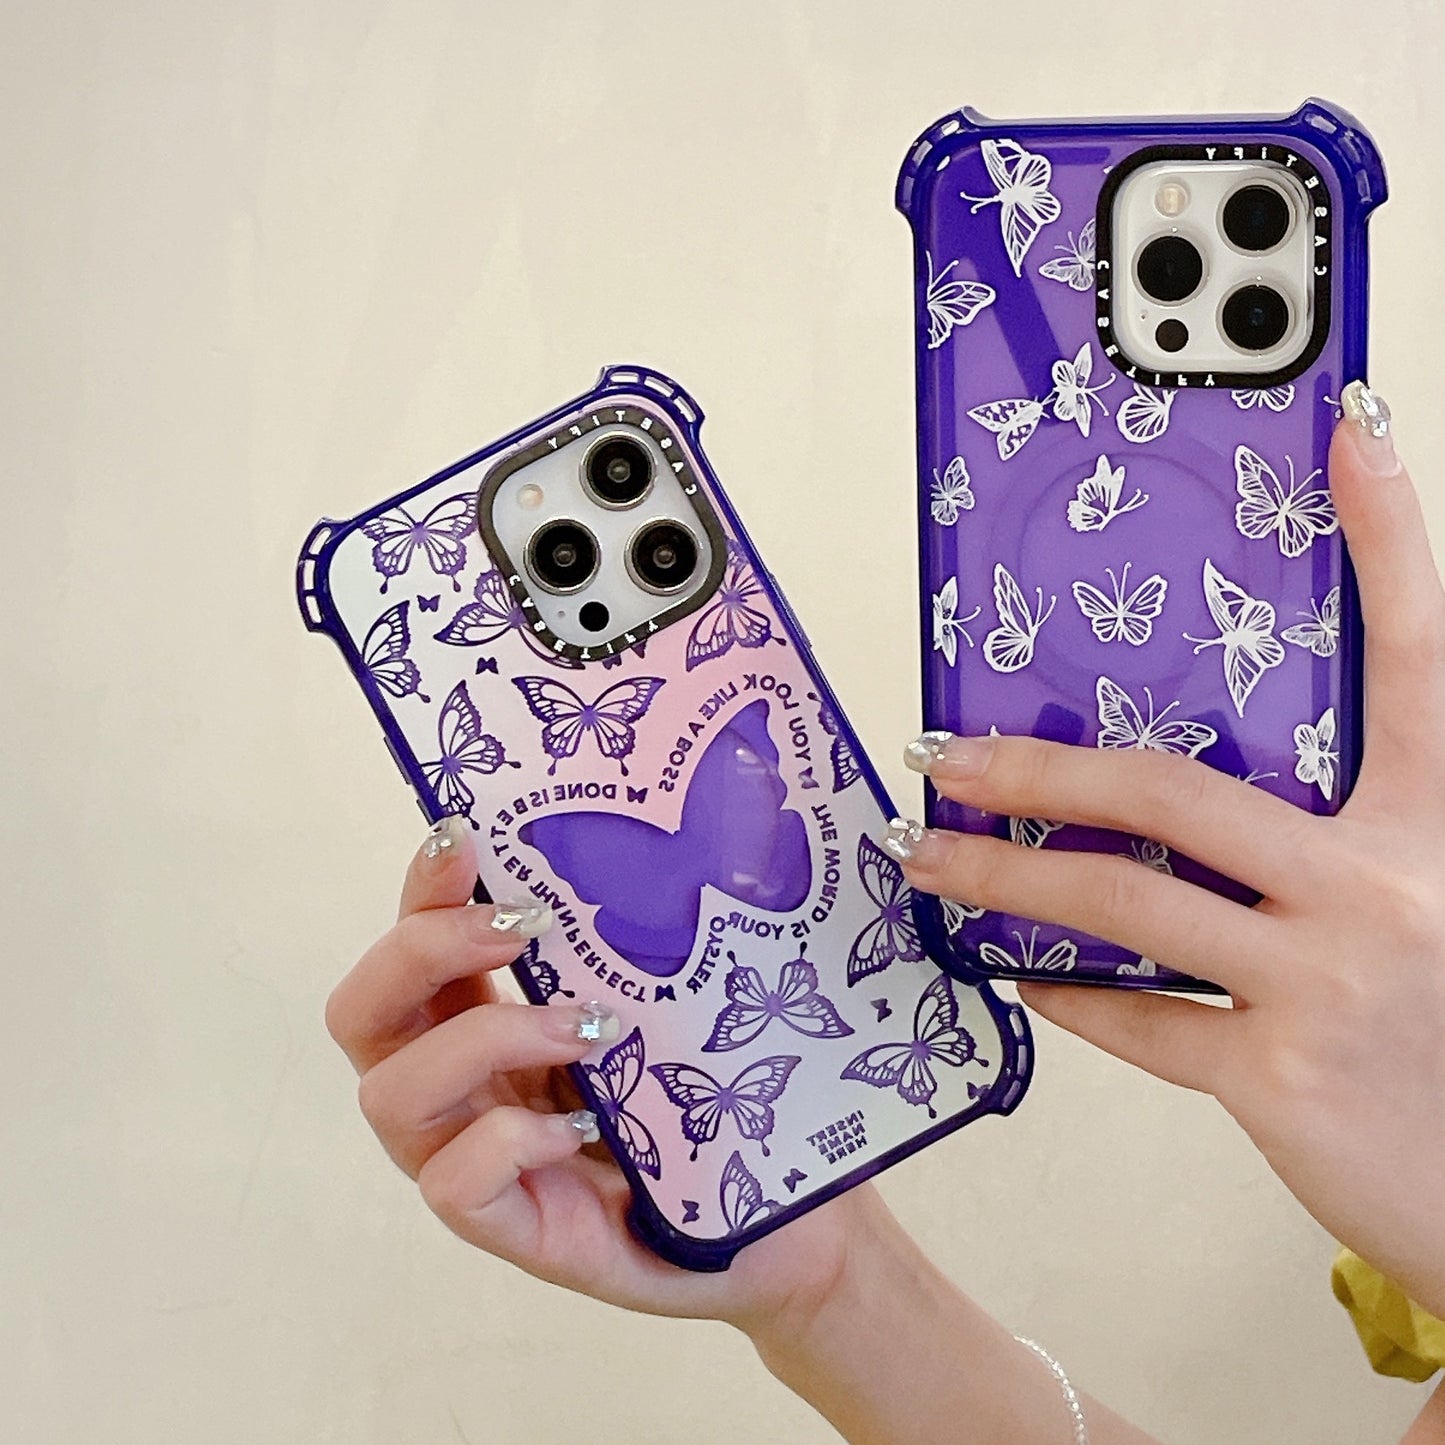 The new iPhone Case Butterfly colony